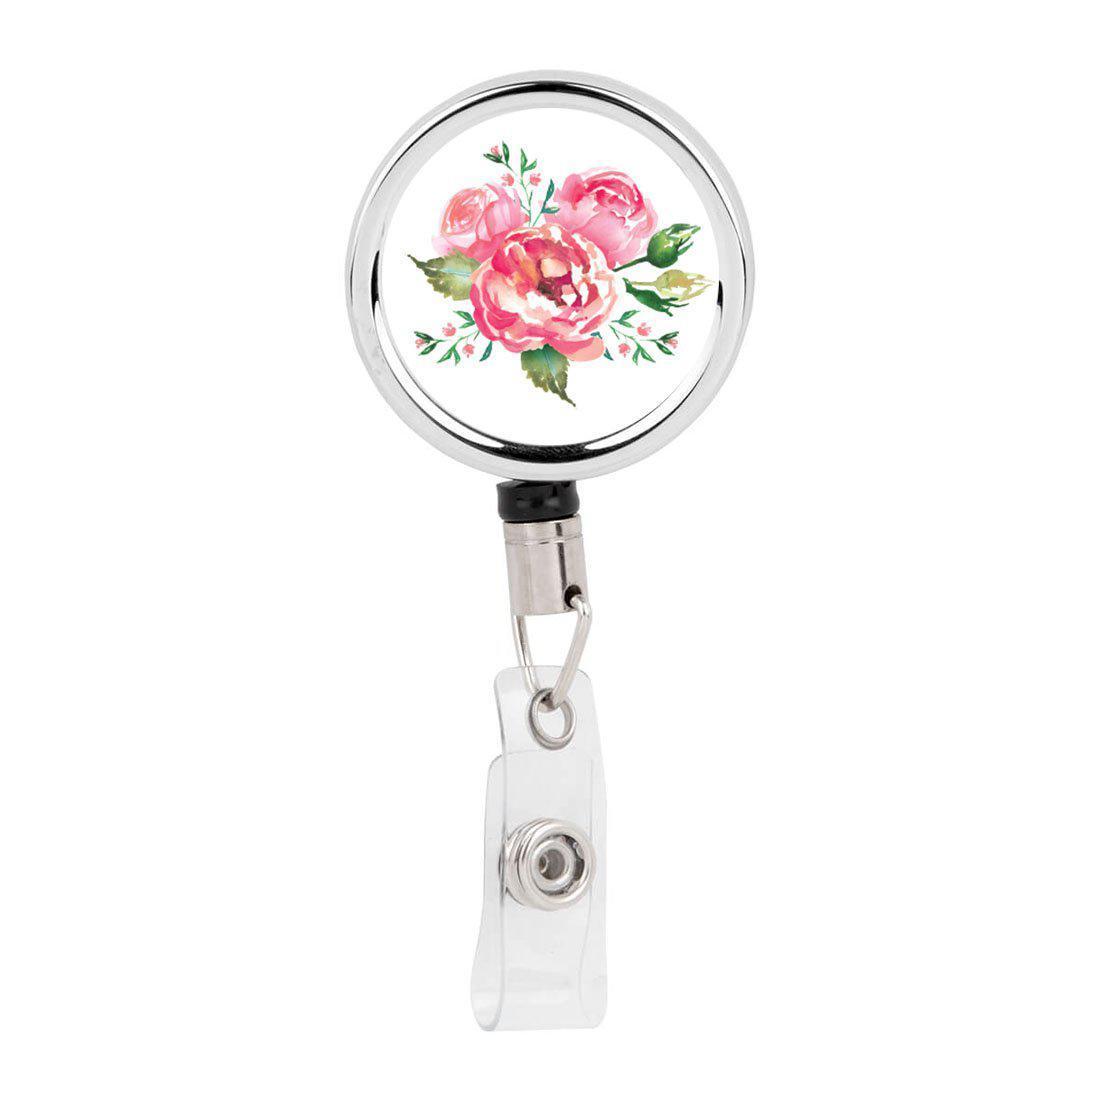 Retractable Badge Reel Holder With Clip, Pink Peonies Floral Design